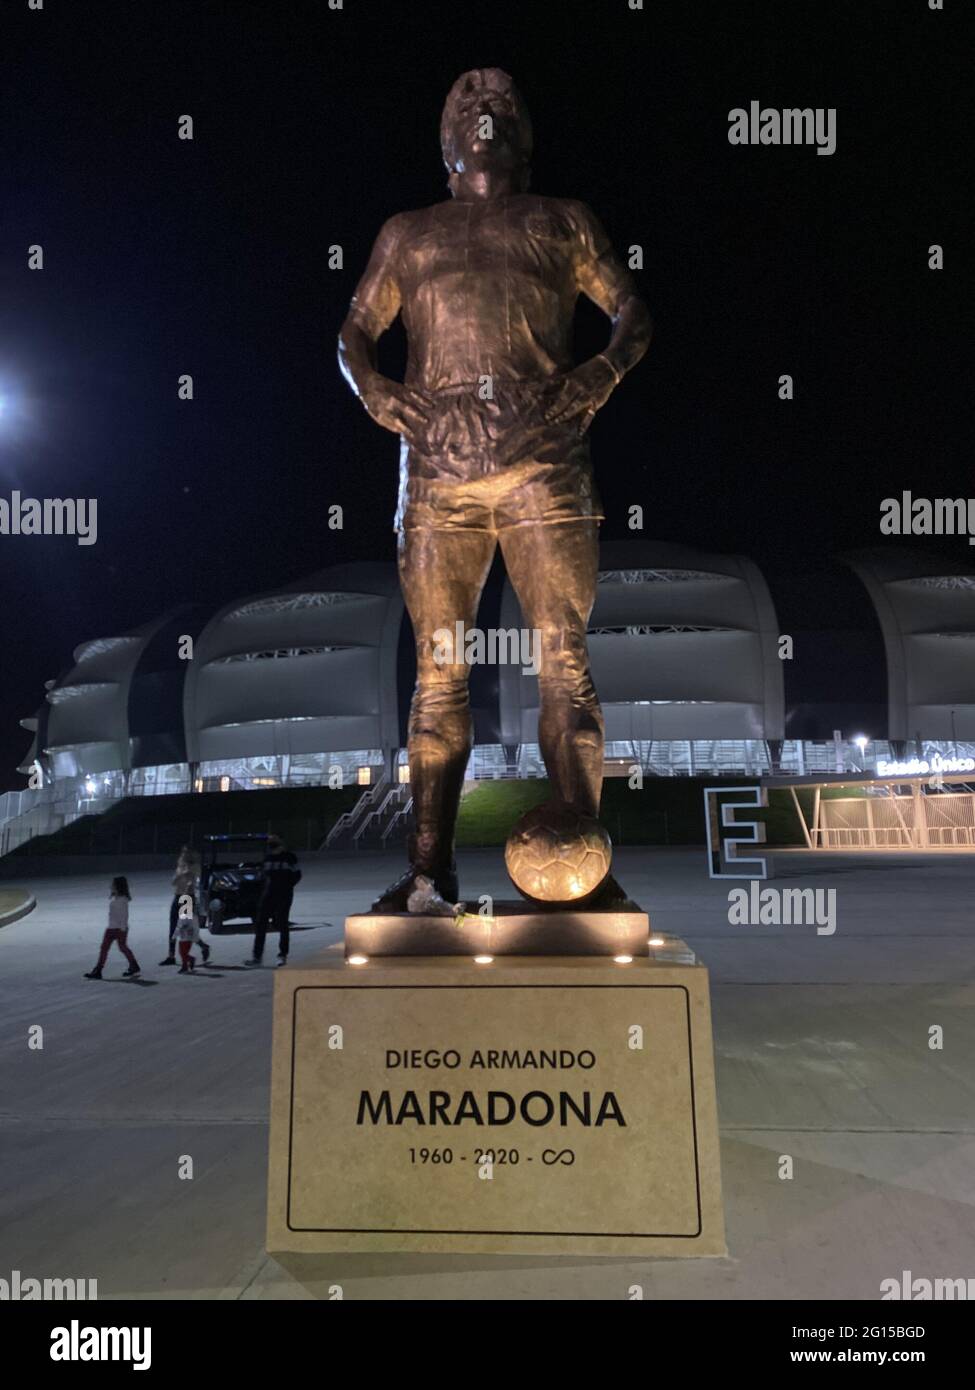 Santiago del Estero, Argentina. 4th June, 2021. (INT) Statue of Diego Maradona in front of Santiago del Estero Stadium. June 4, 2021, Santiago del Estero, Argentina: The Argentinan National Soccer team paid tribute by unveiling the statue of Diego Maradona, the late Argentinan soccer player in front of Madre de Ciudades stadium in Santiago del Estero, Argentina on Thursday (3) before their World Cup qualifier match against Chile. They played with an image of Maradona on their Jerseys. Credit: Mel Valle/Thenews2 Credit: Mel Valle/TheNEWS2/ZUMA Wire/Alamy Live News Stock Photo